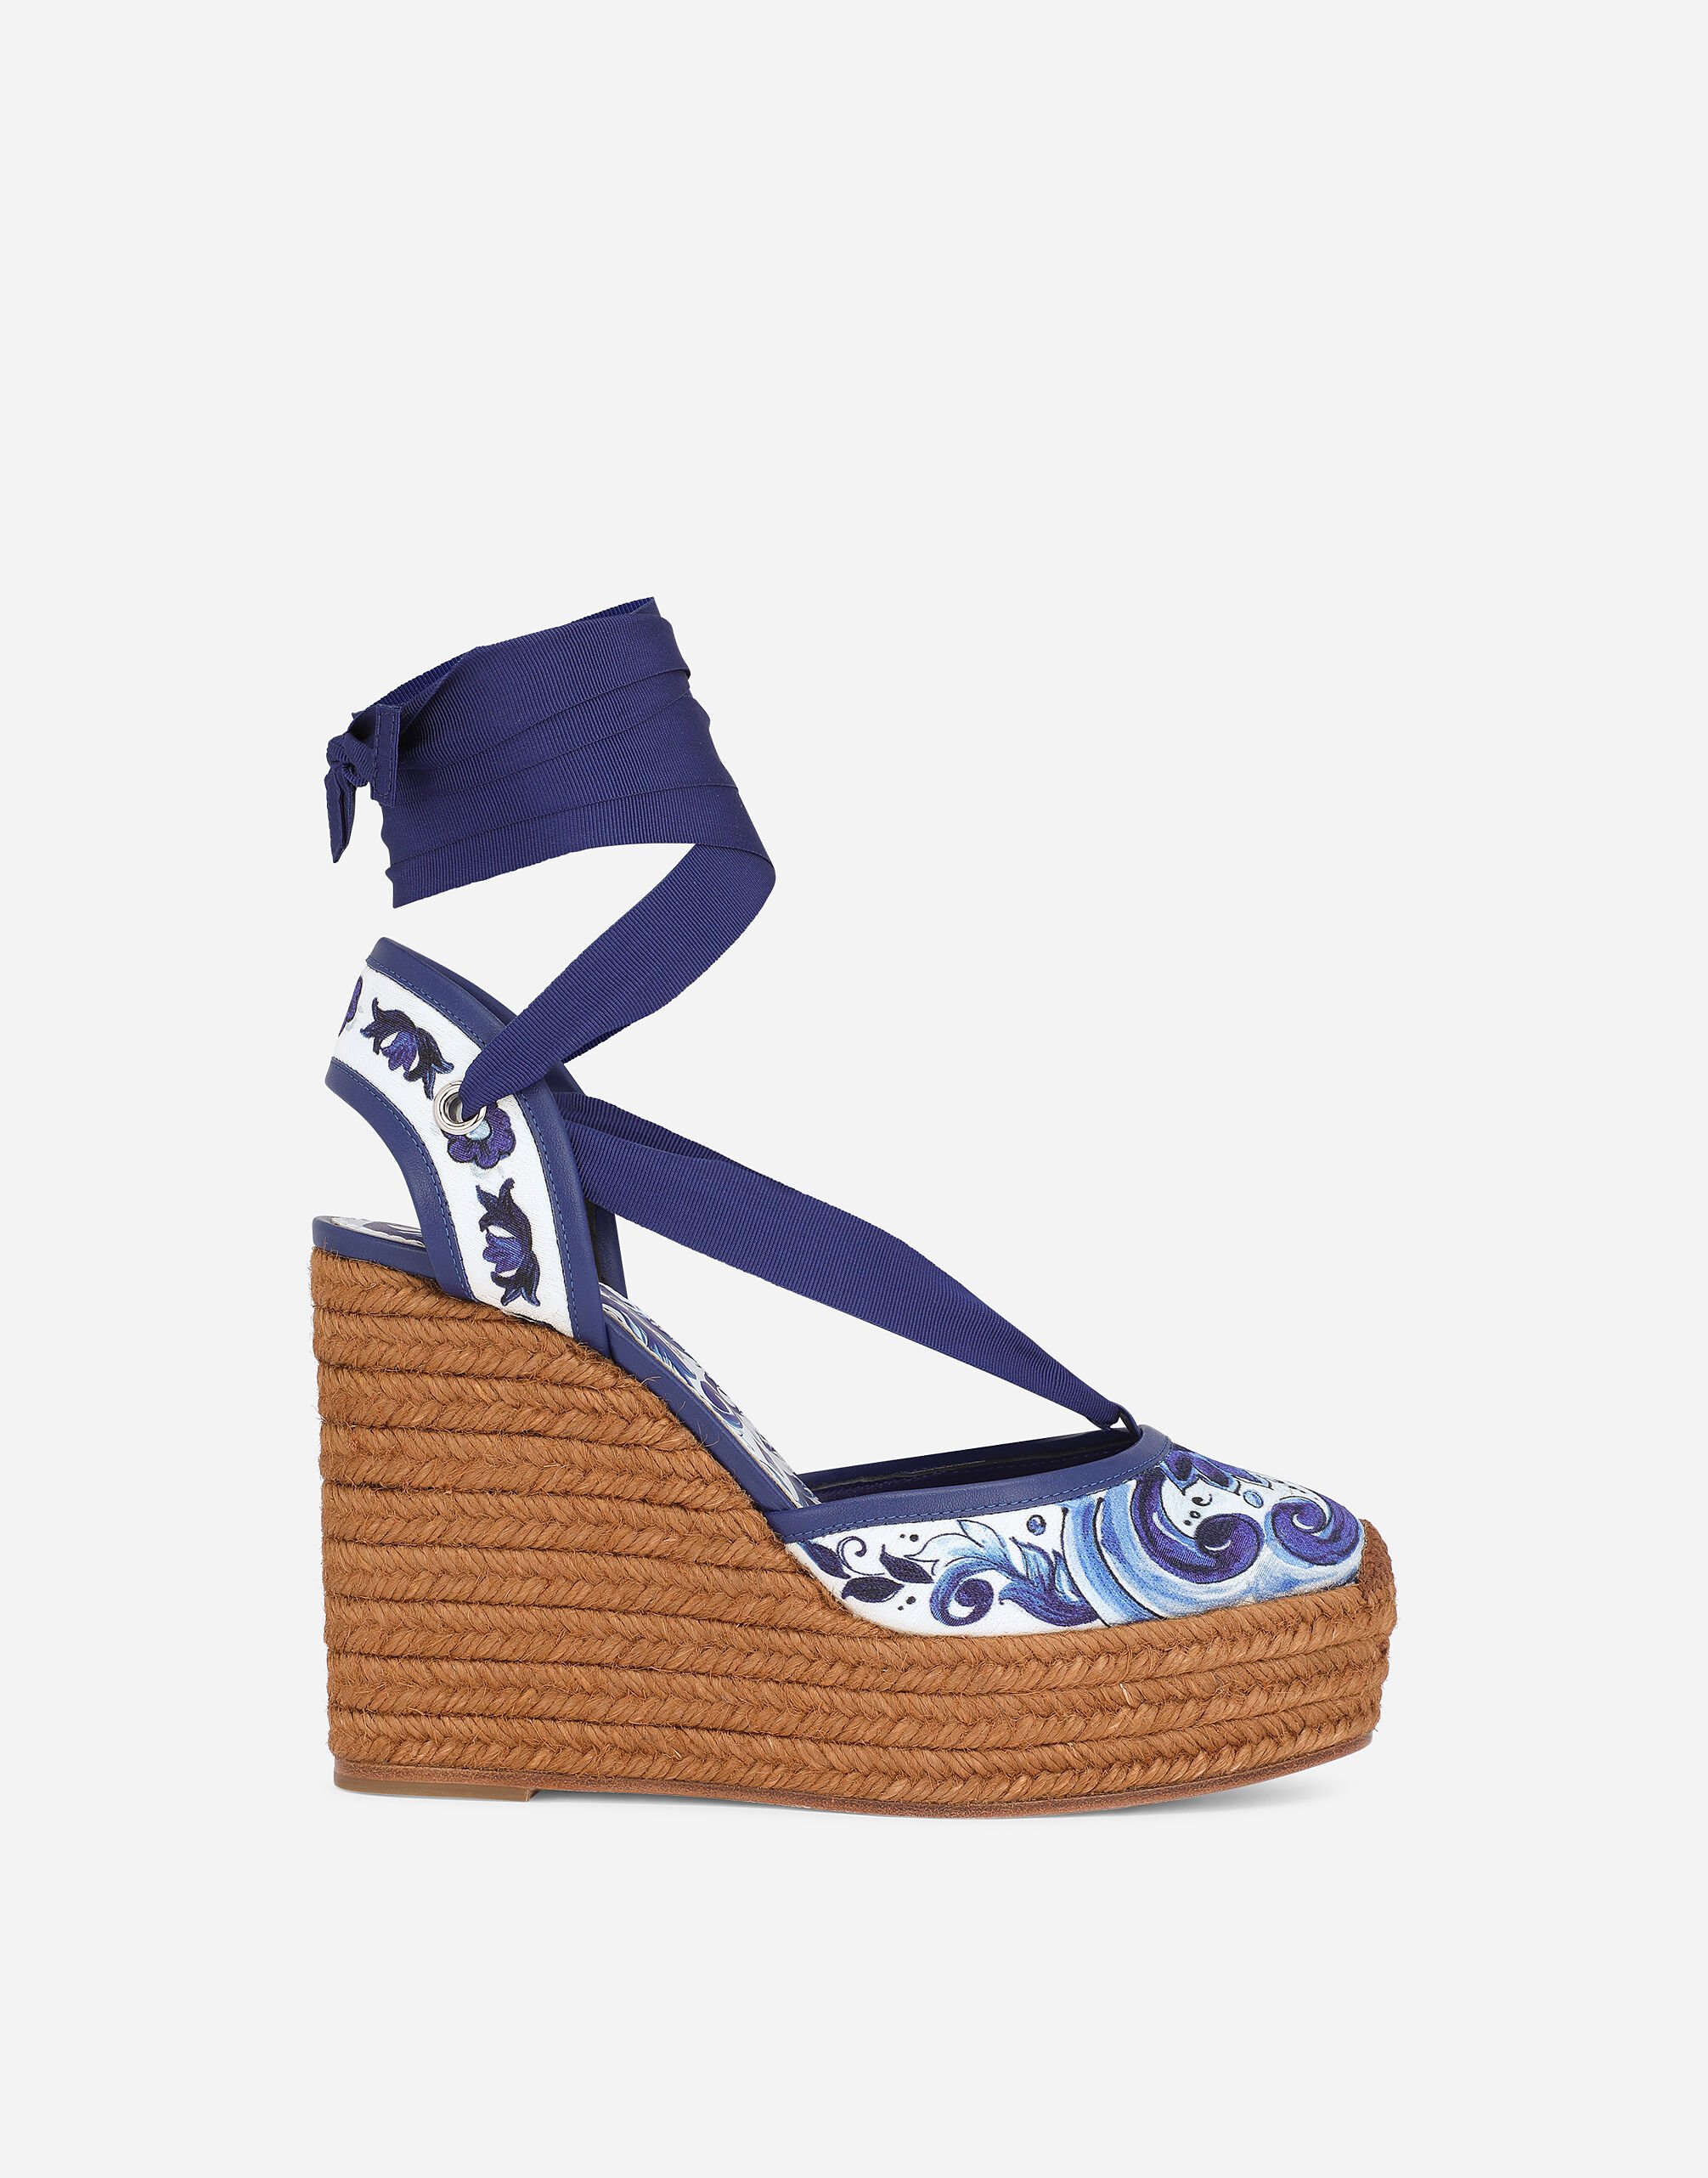 ${brand} Rope-soled wedges in printed brocade fabric ${colorDescription} ${masterID}